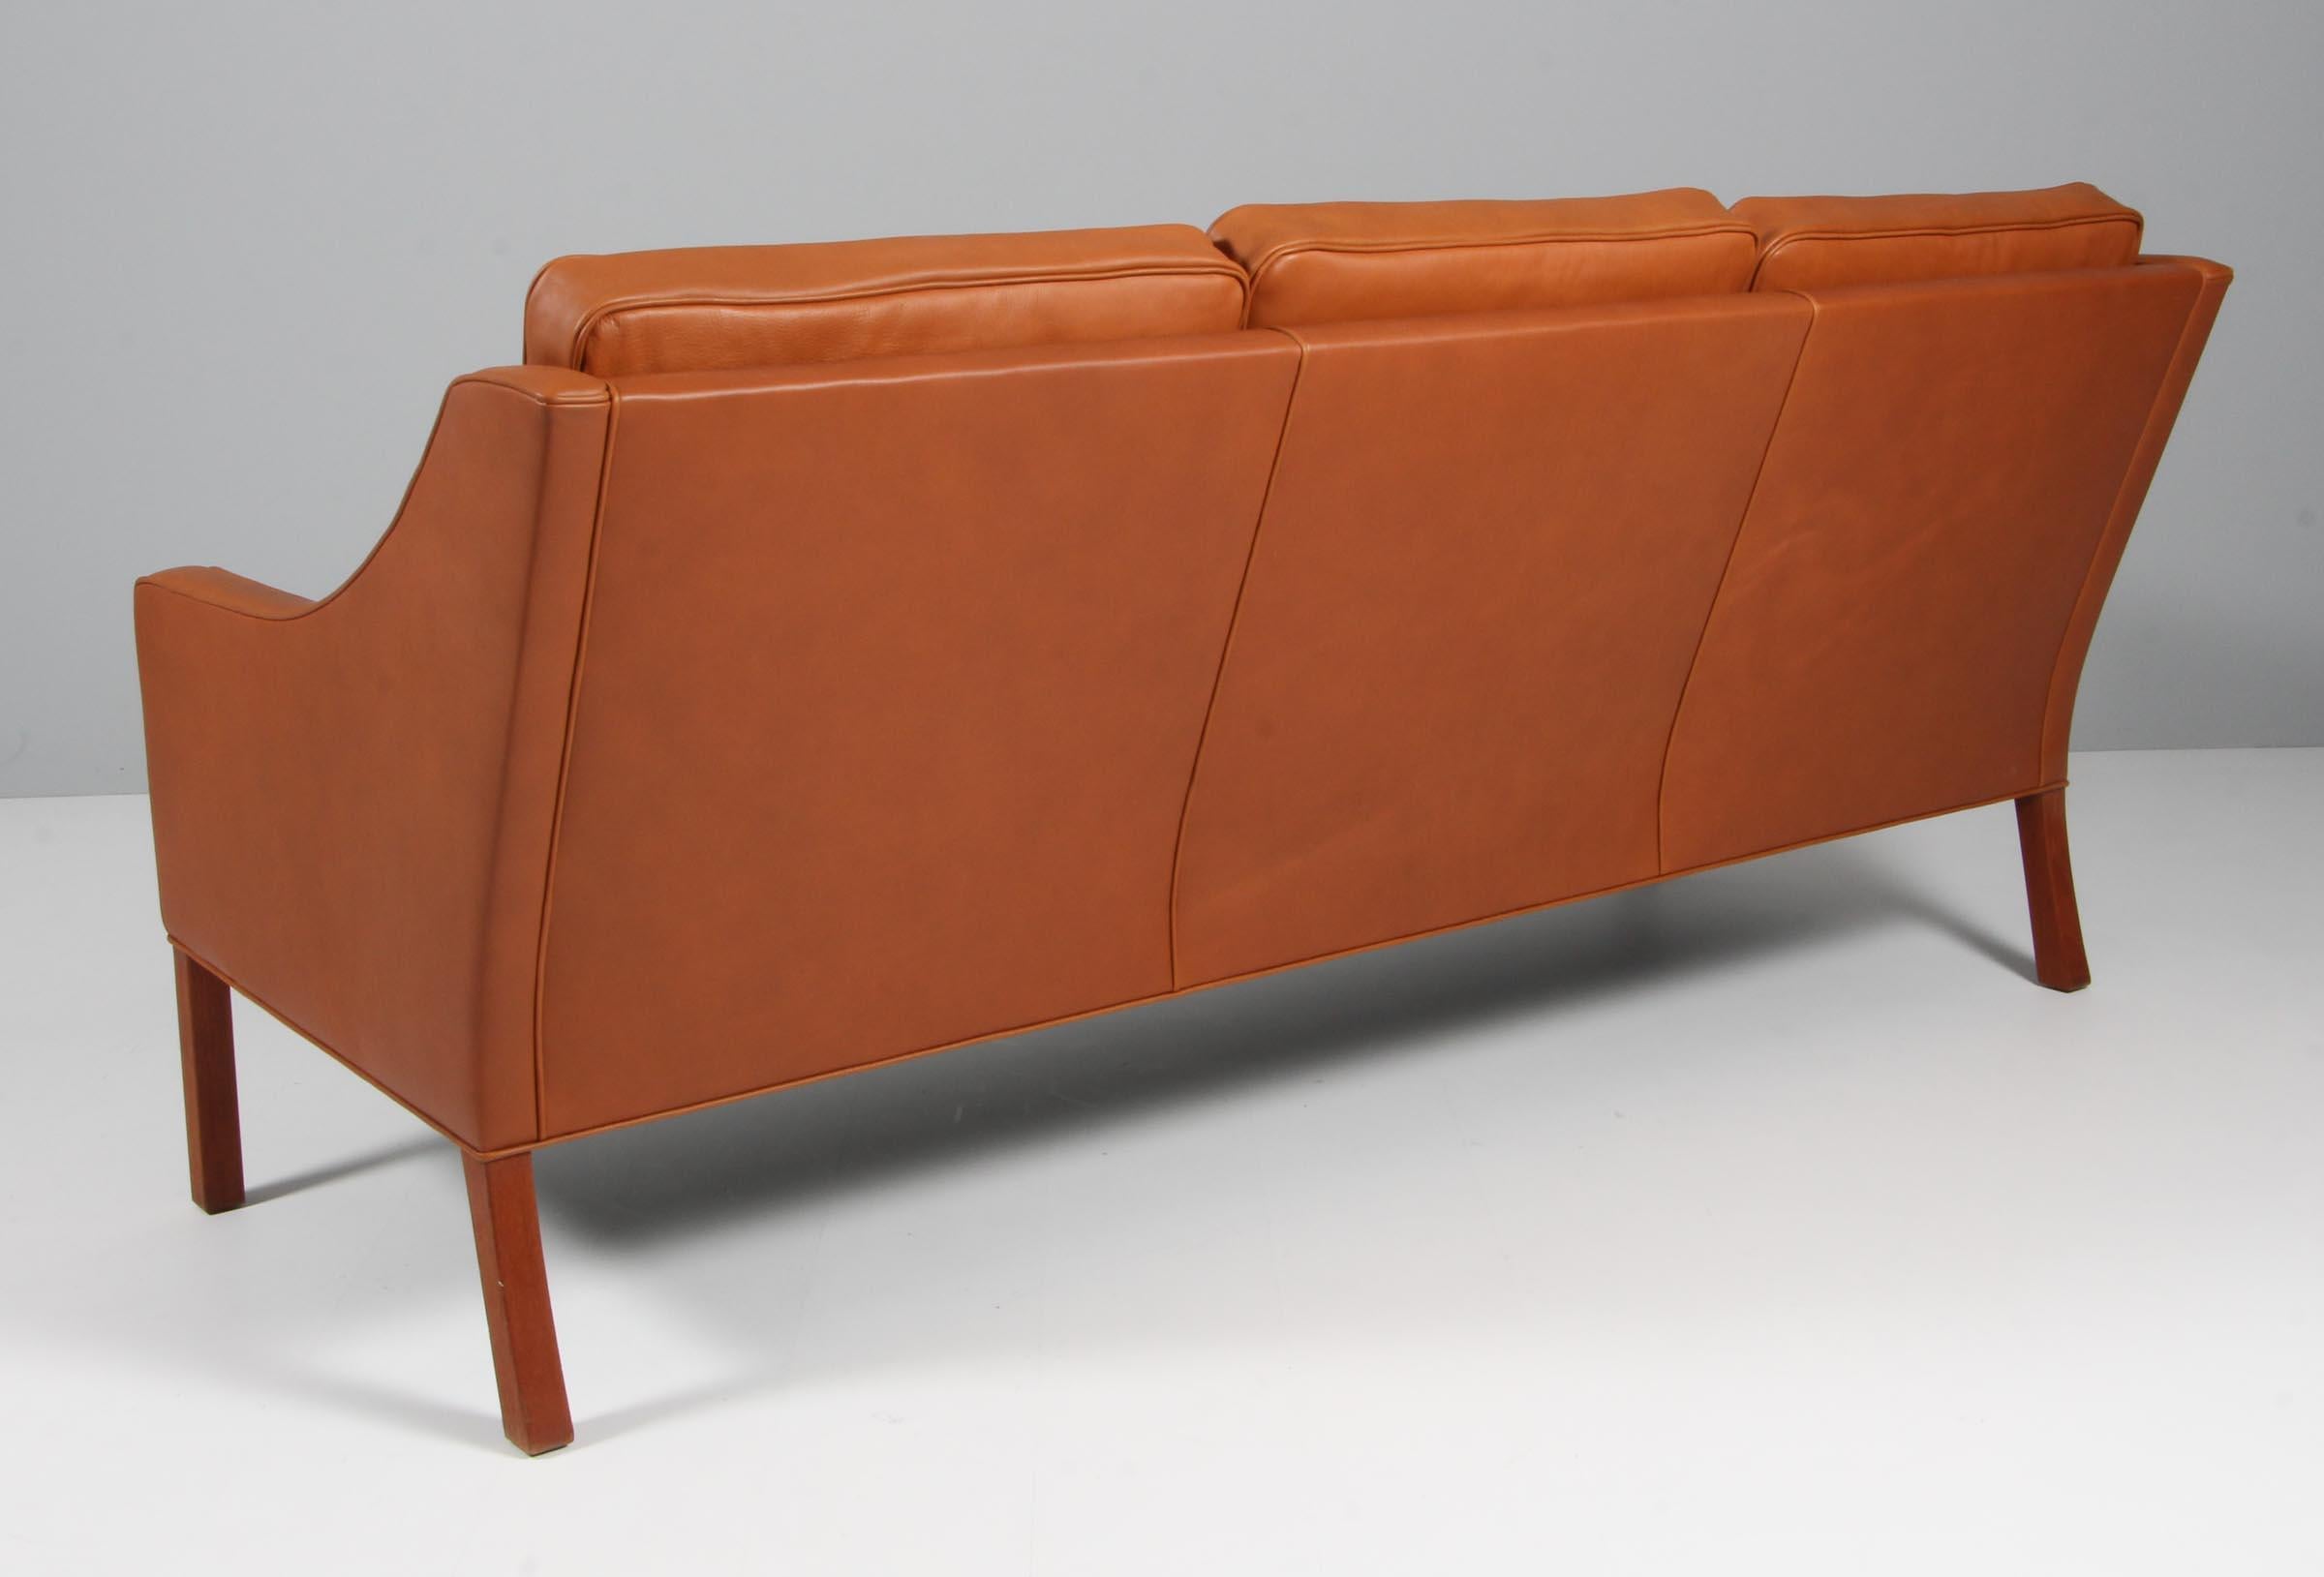 Børge Mogensen three-seat sofa new upholstery with walnut elegance aniline leather.

Legs of teak.

Model 2209, made by Fredericia furniture.